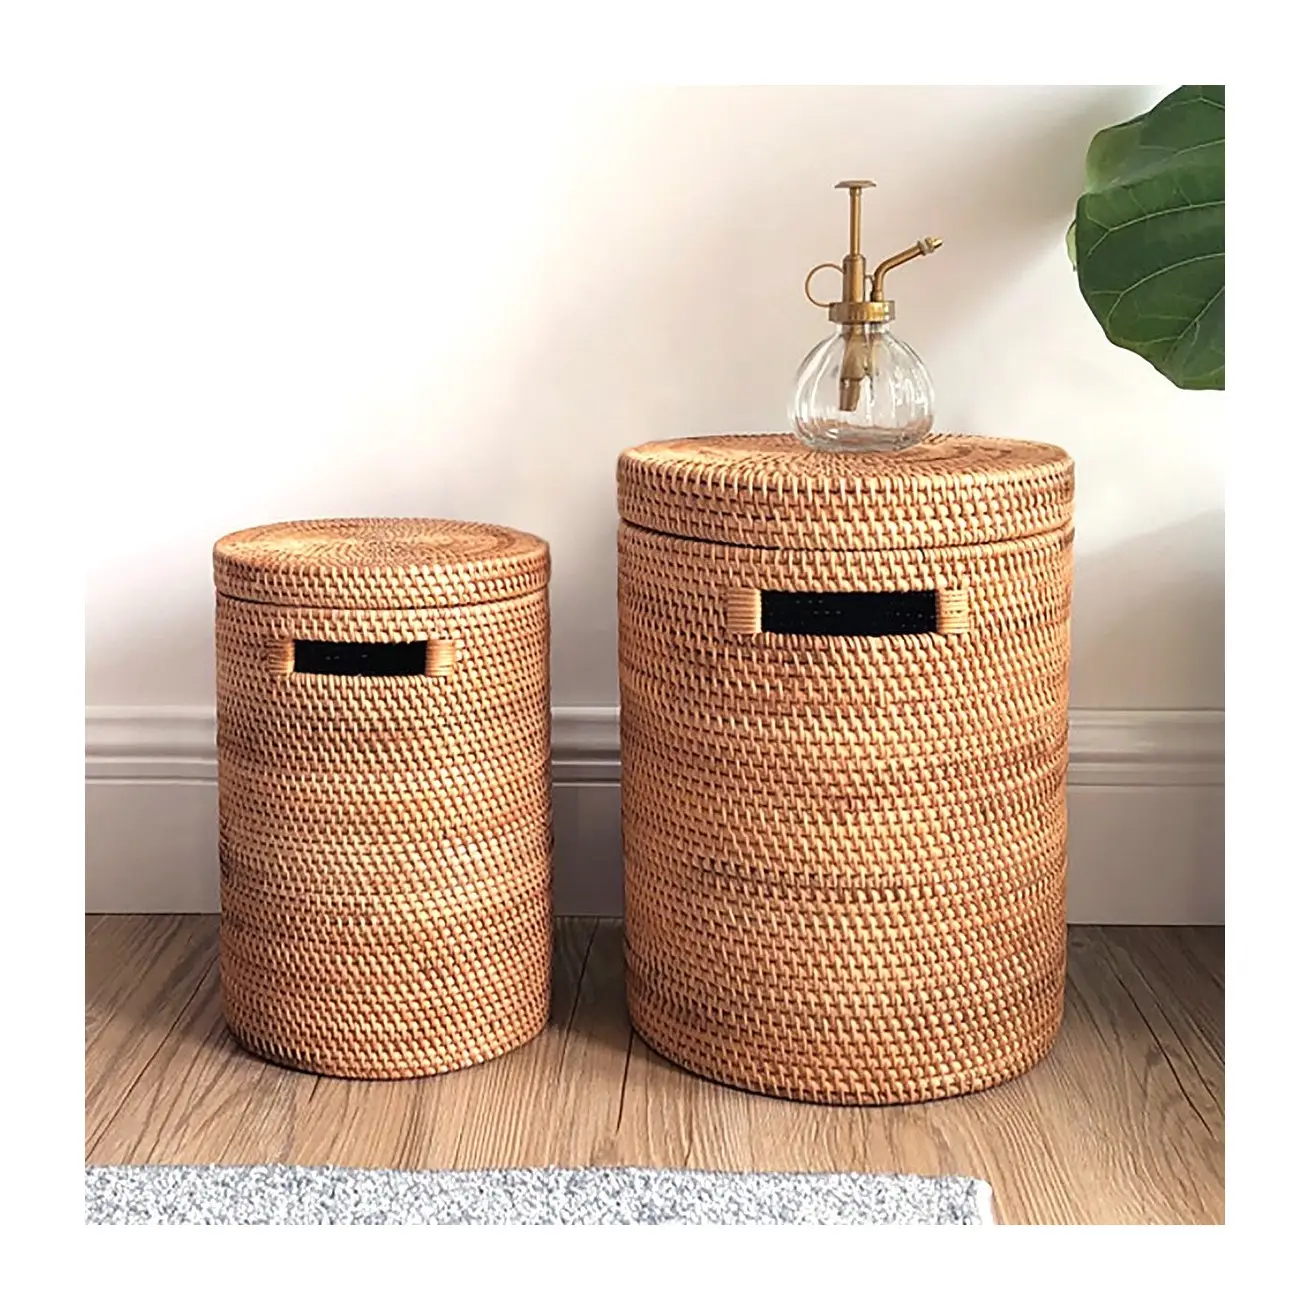 Rattan bamboo natural wood basket weaving handcrafted baskets with handle and lid from Vietnam